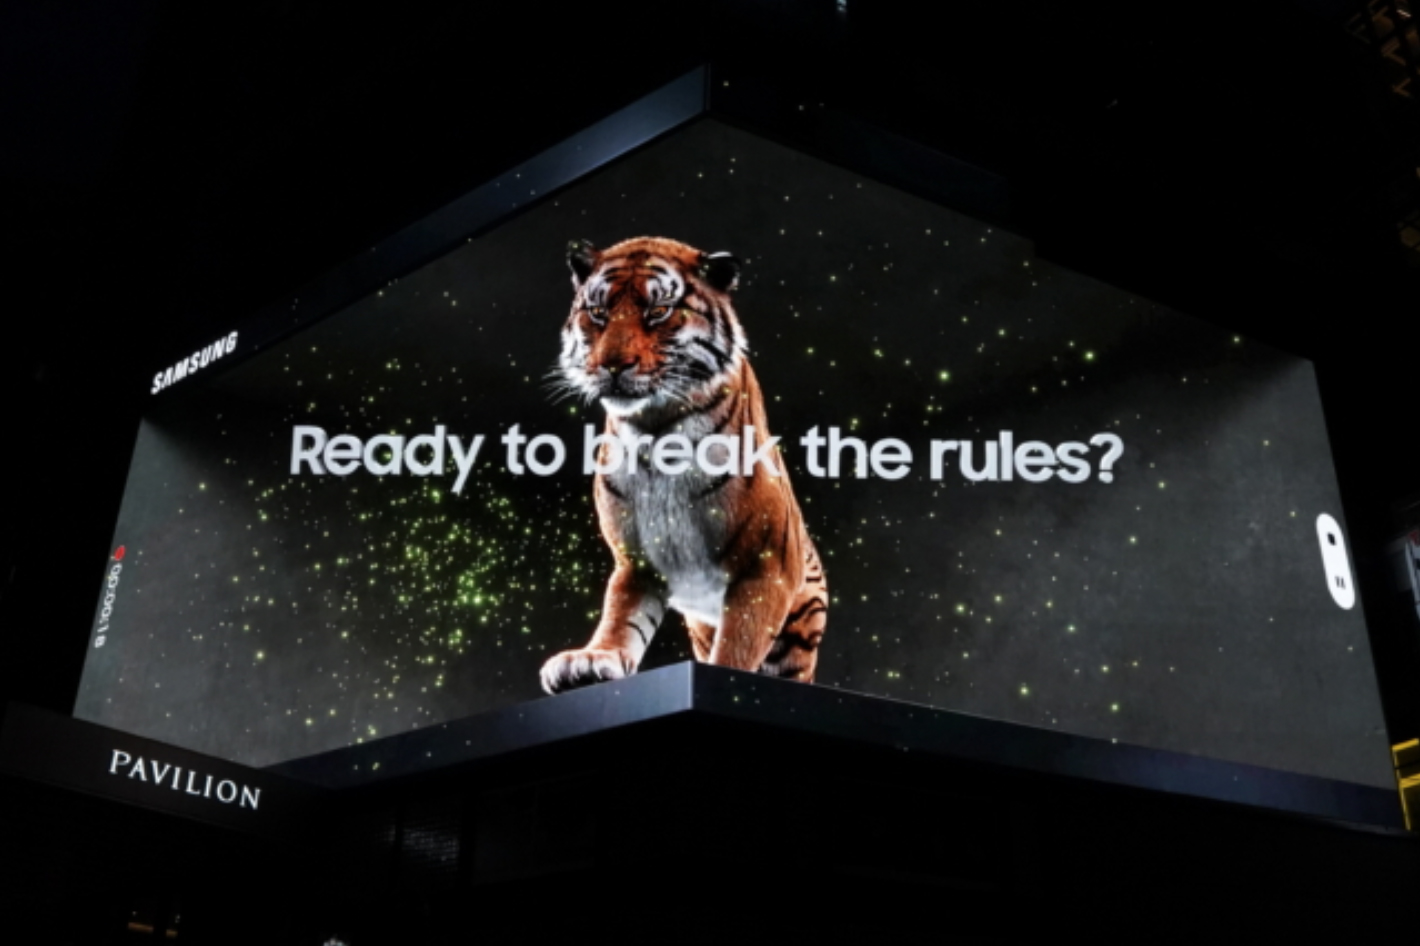 Samsung Galaxy S22 smartphones aims to break the rules of light